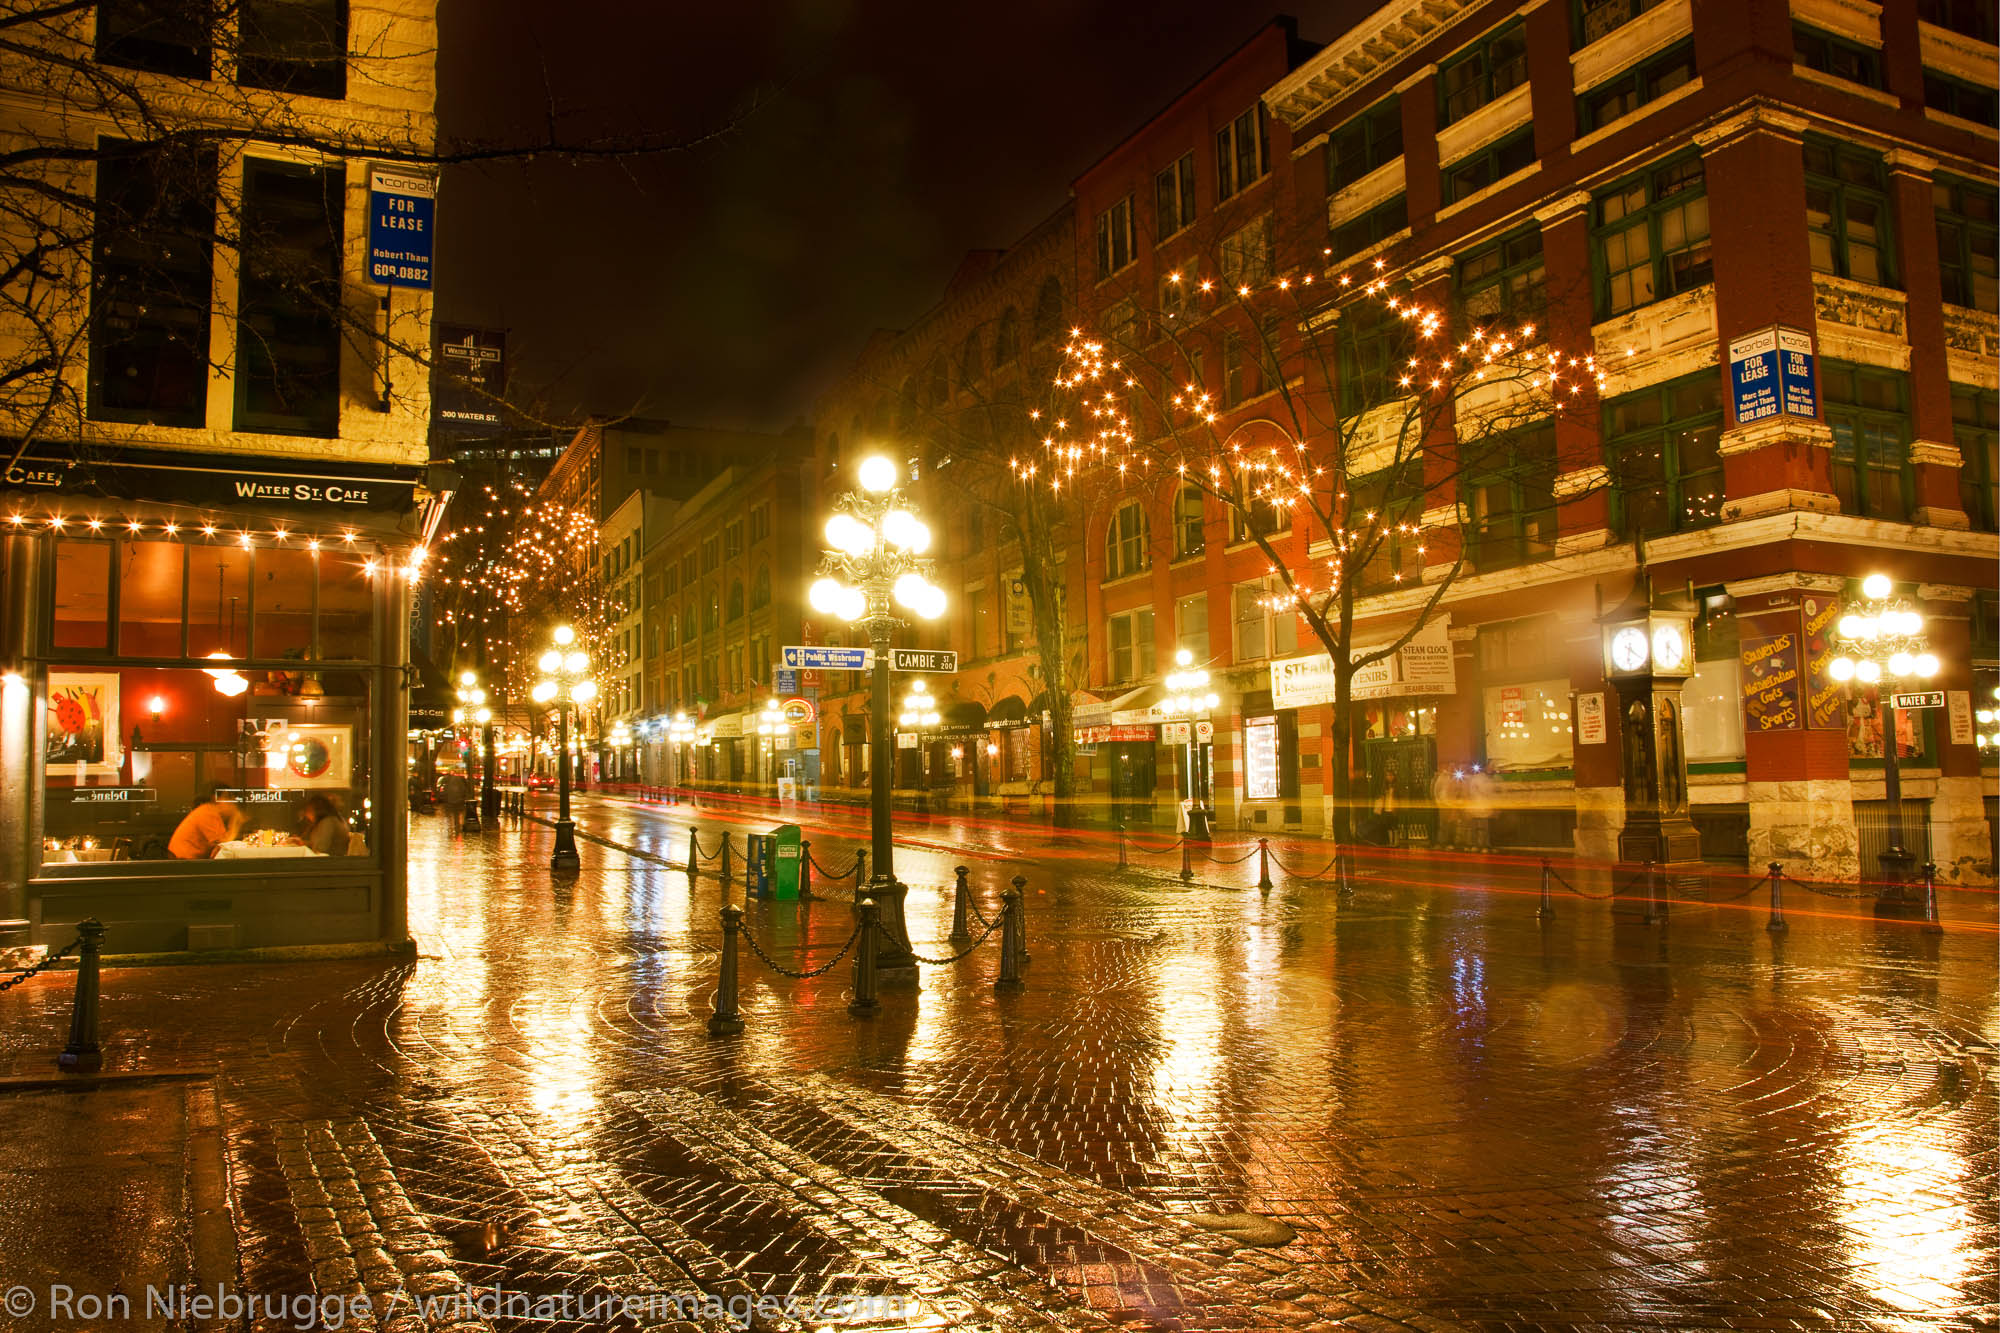 Gastown area in the host city of the 2010 Winter Olympics, Vancouver, British Columbia, Canada.